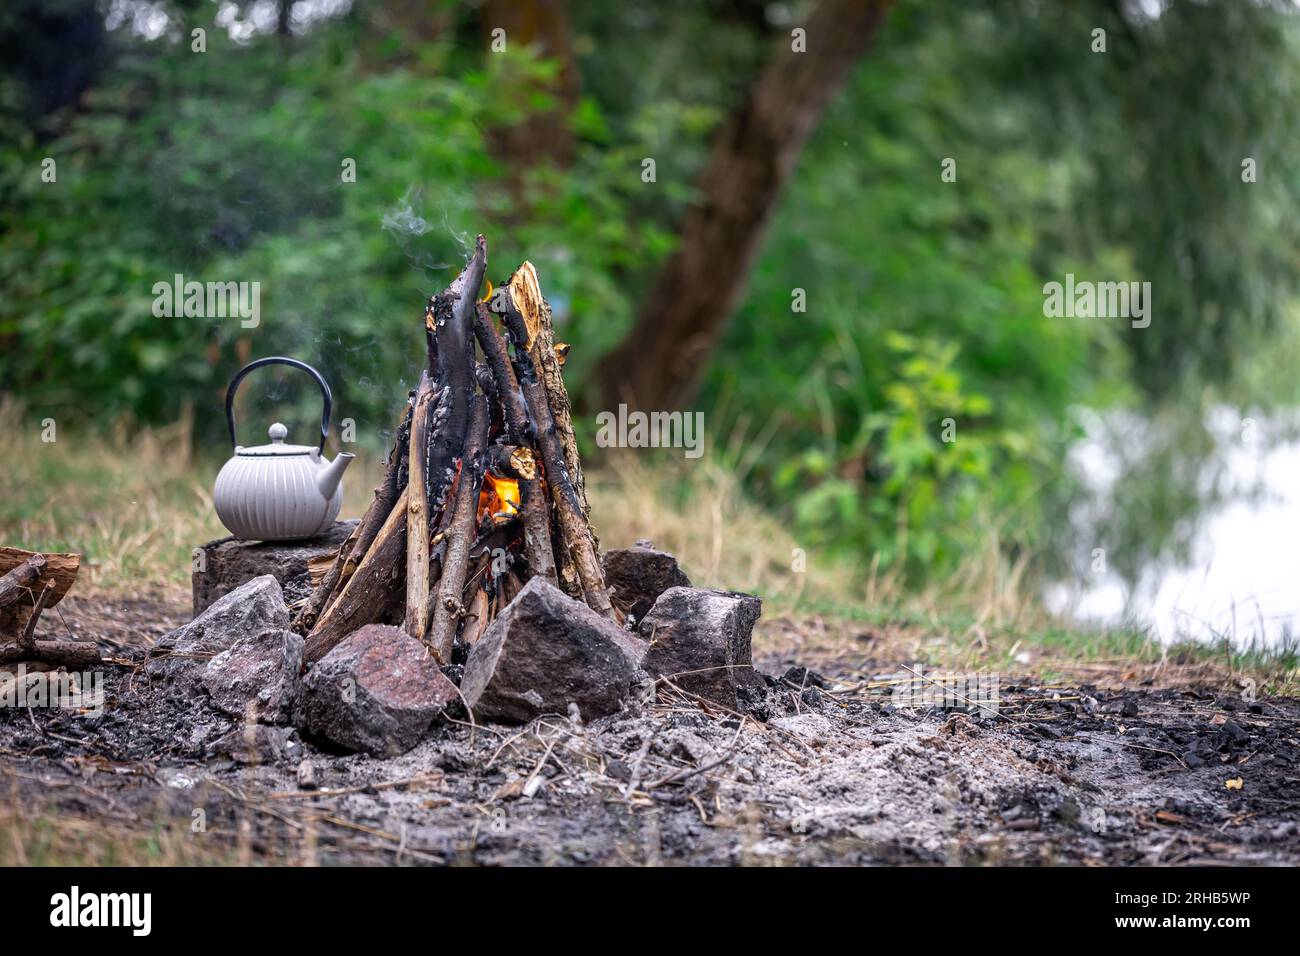 https://c8.alamy.com/comp/2RHB5WP/small-kettle-is-heated-on-a-bonfire-outdoor-recreation-concept-2RHB5WP.jpg